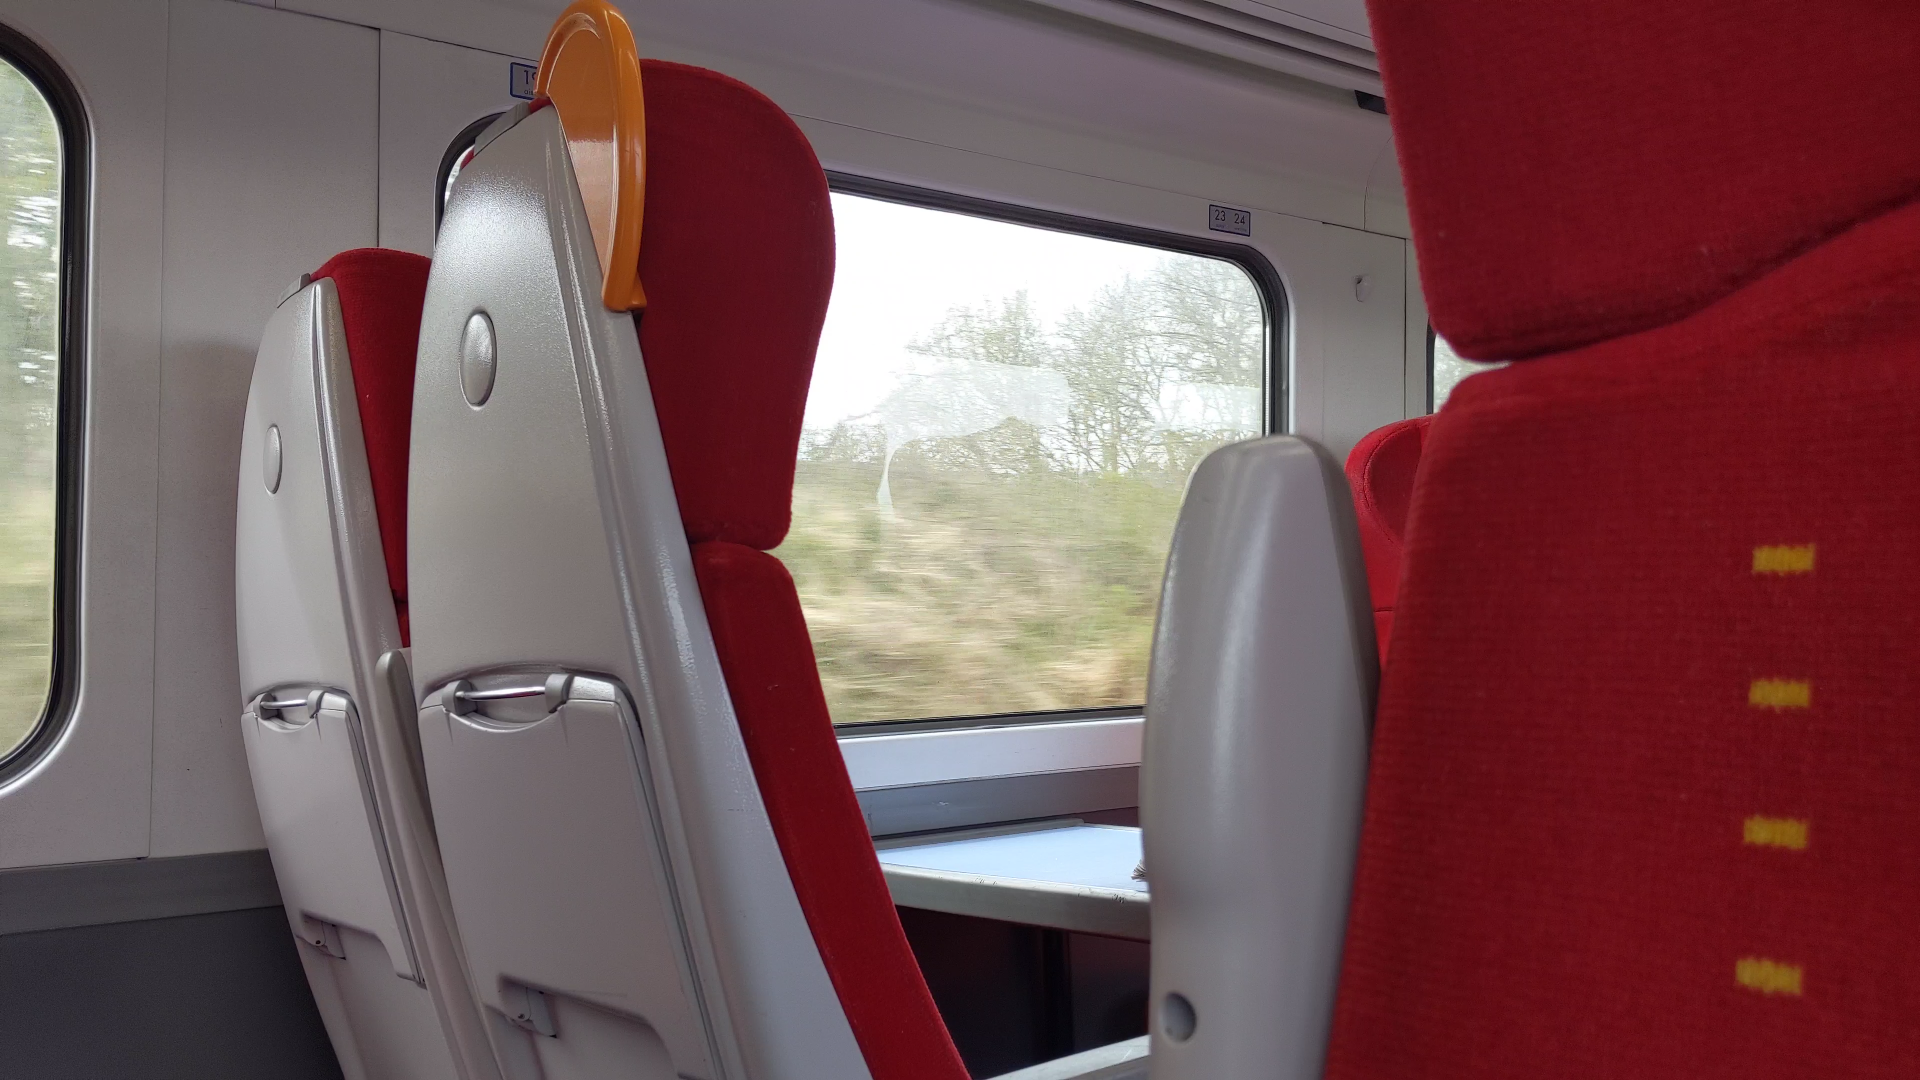 There are seats with red moquette on the front and grey plastic on the back. On the backs of seats are fold-down tables, which are large enough to hold a drink, a snack, and a book. There are orange grab handles on the seats next to the walkways. There are grey plastic seat rests that can be folded down or kept up.